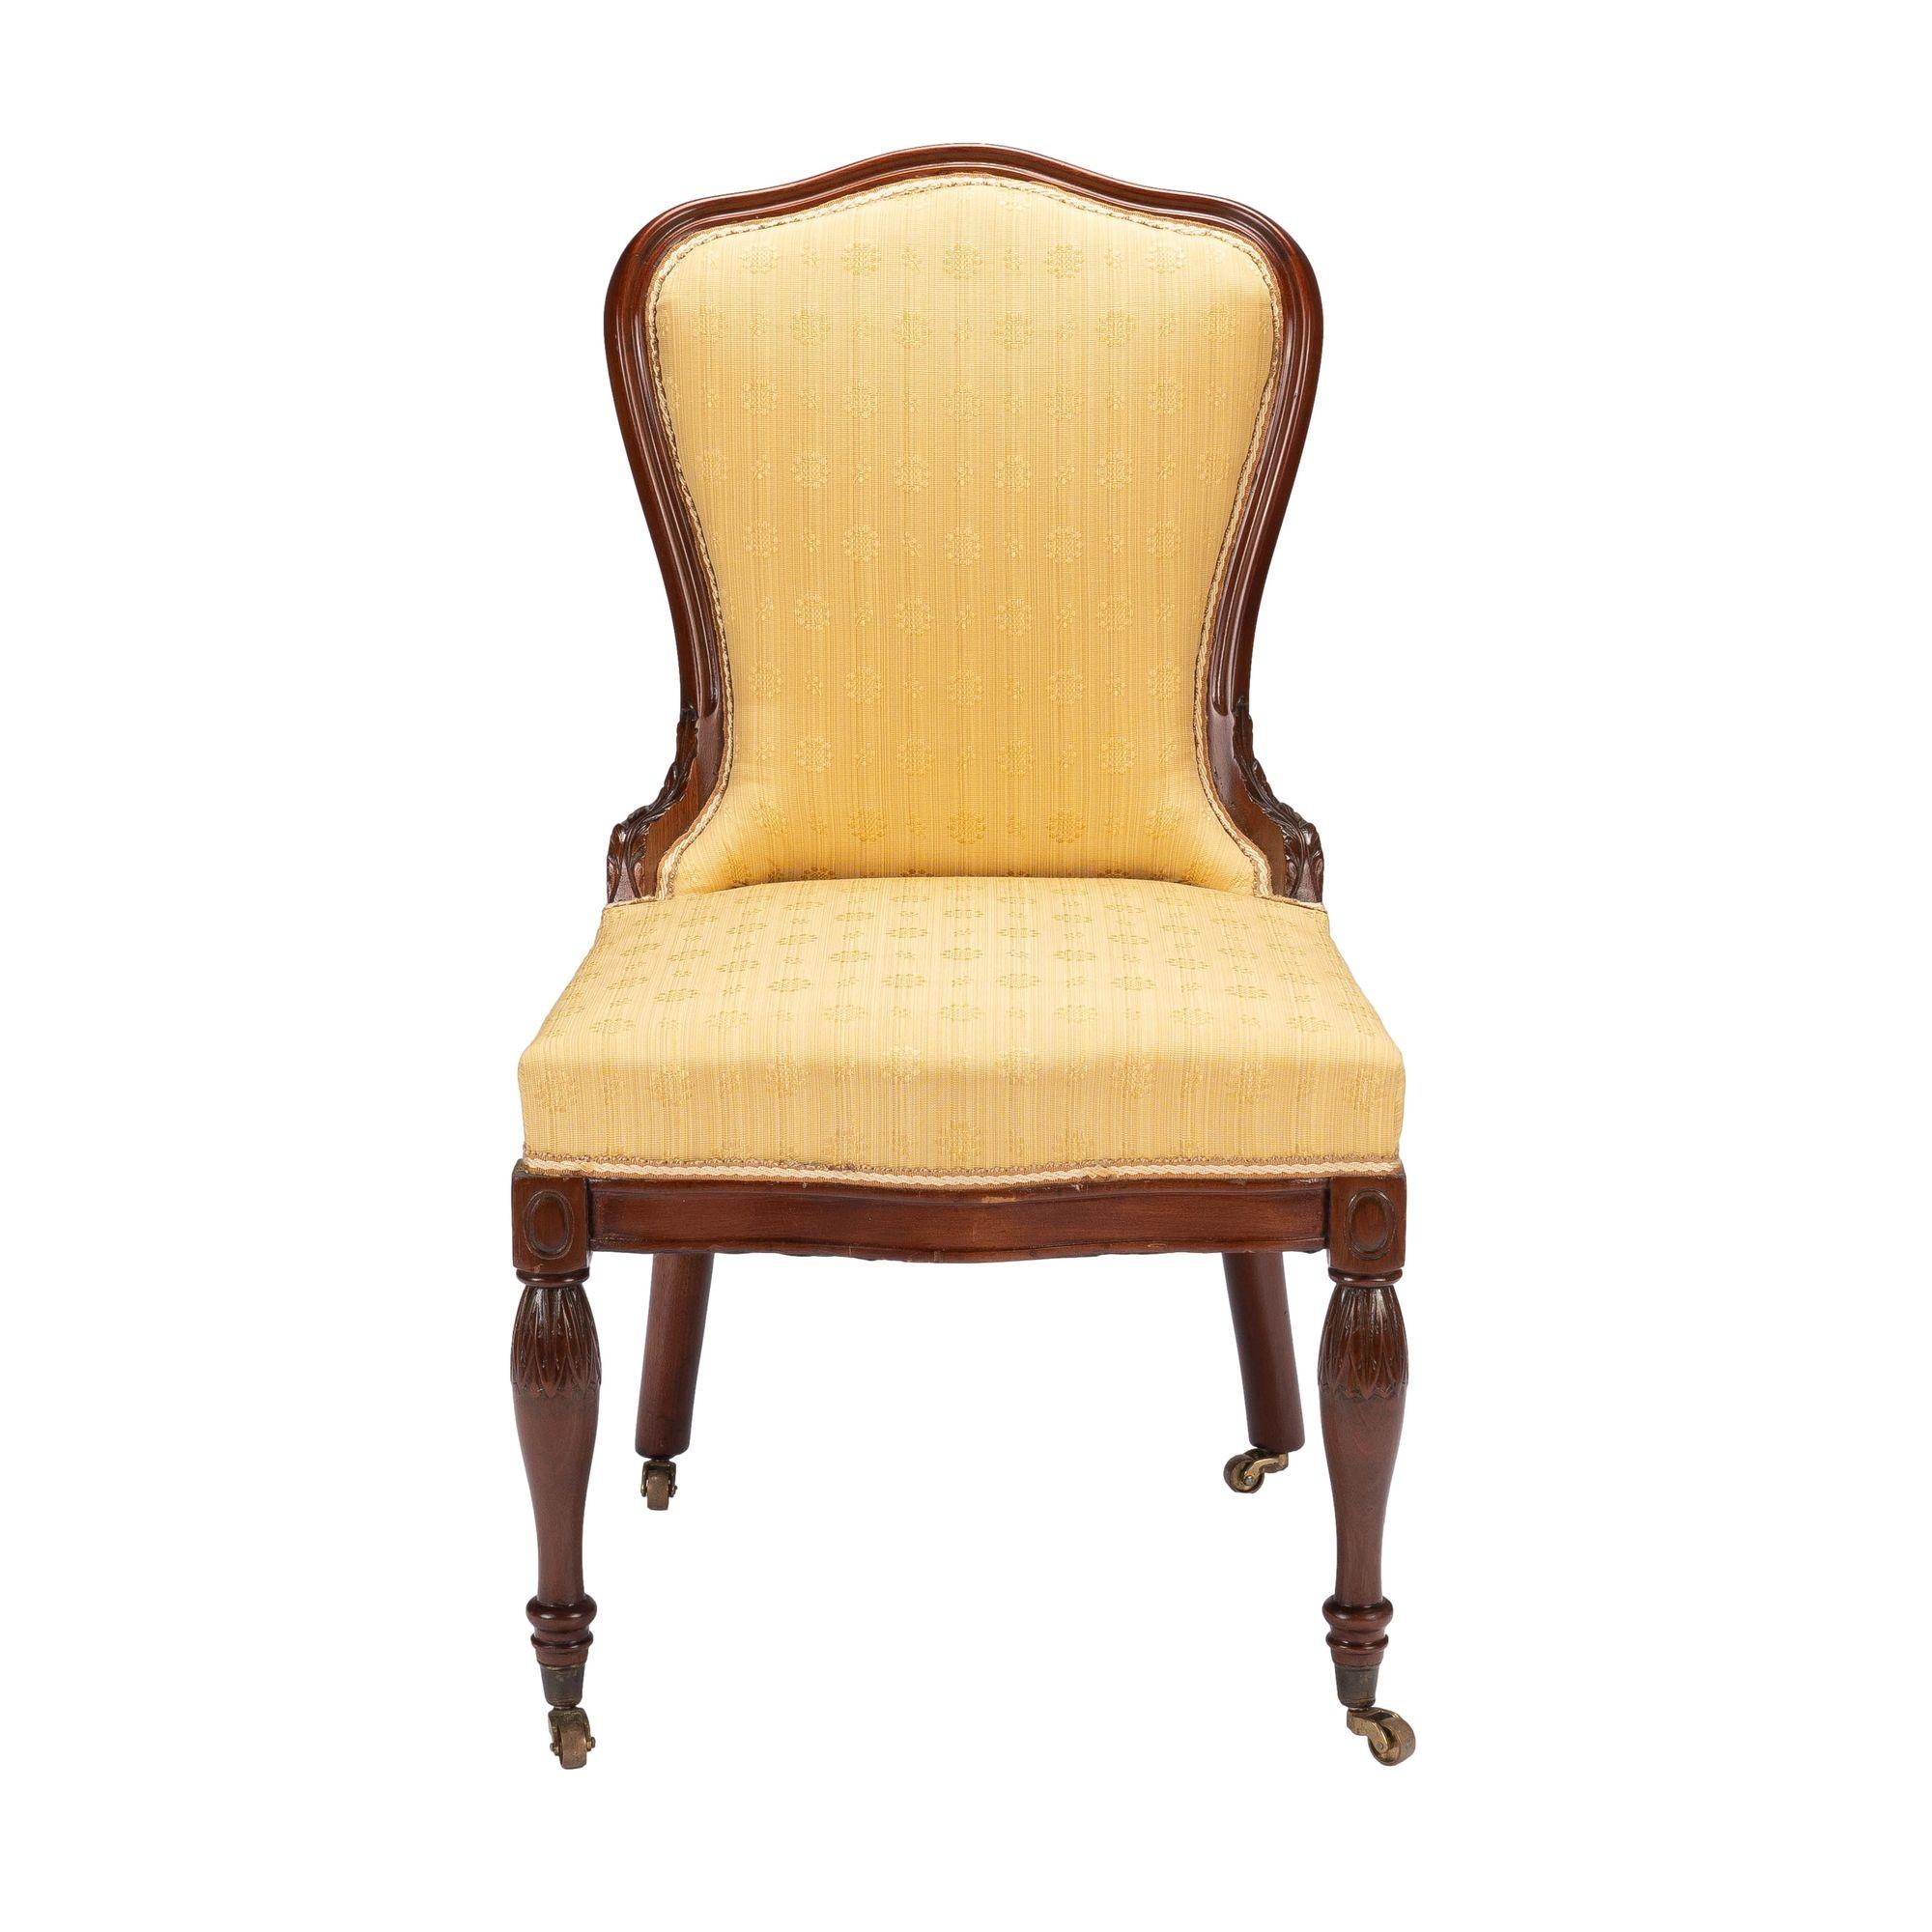 Baltimore Louis XVI Revival upholstered mahogany slipper chair. The chair features turned and carved front legs and raked rear legs. All legs rest in cast brass cup castors. The upholstered boxed seat is mounted to a conforming mahogany seat frame,